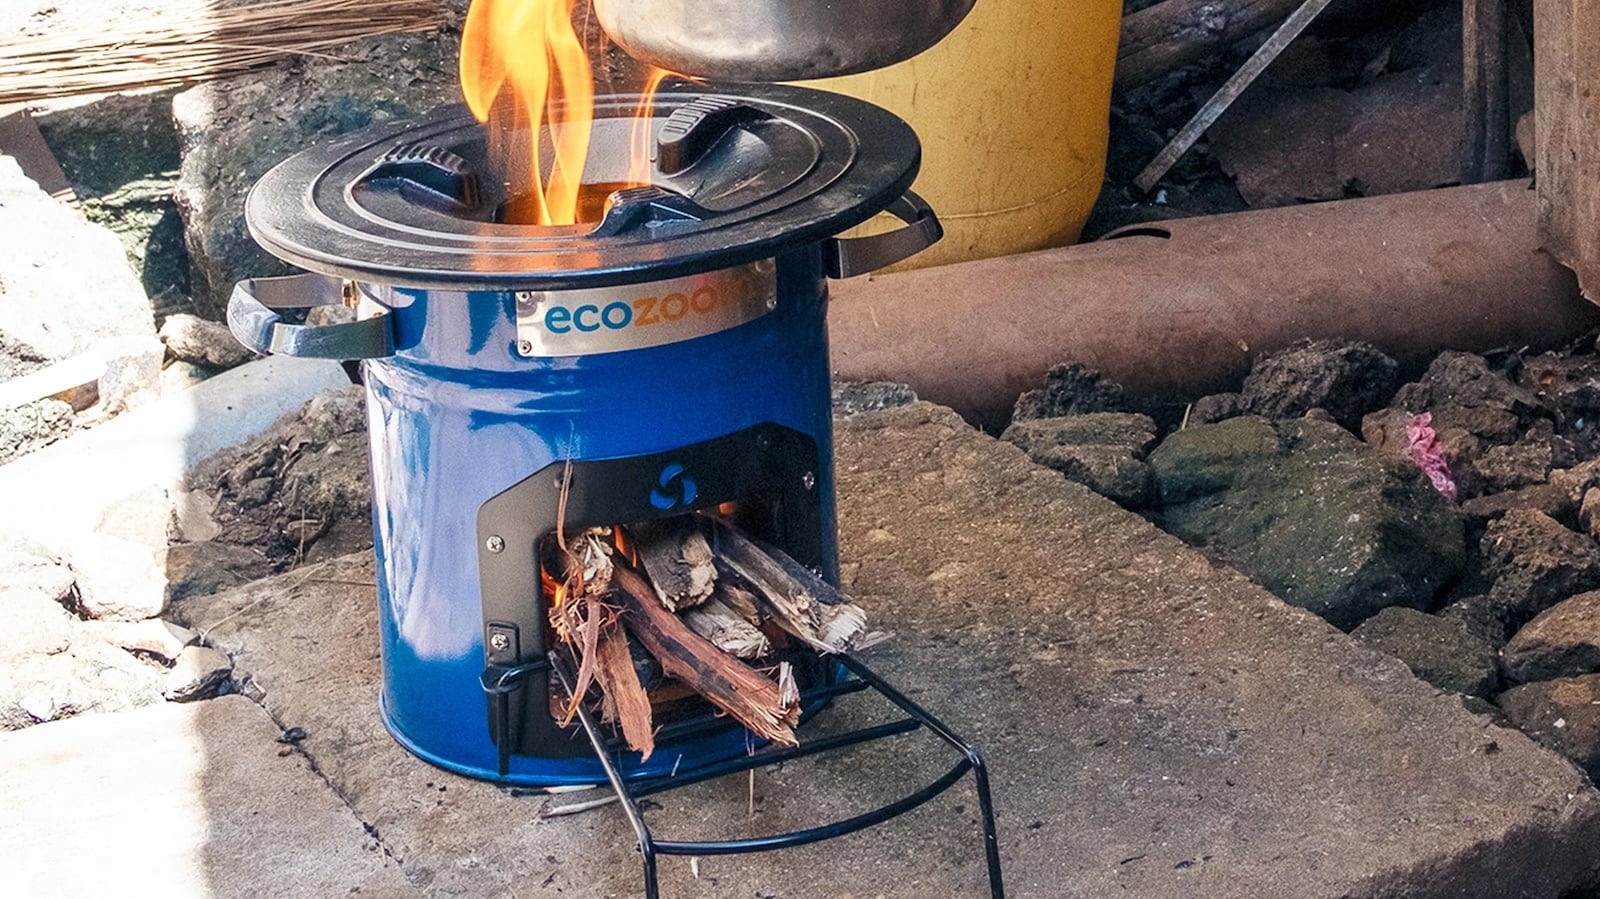 This portable wood burning stove cooks food and boils water